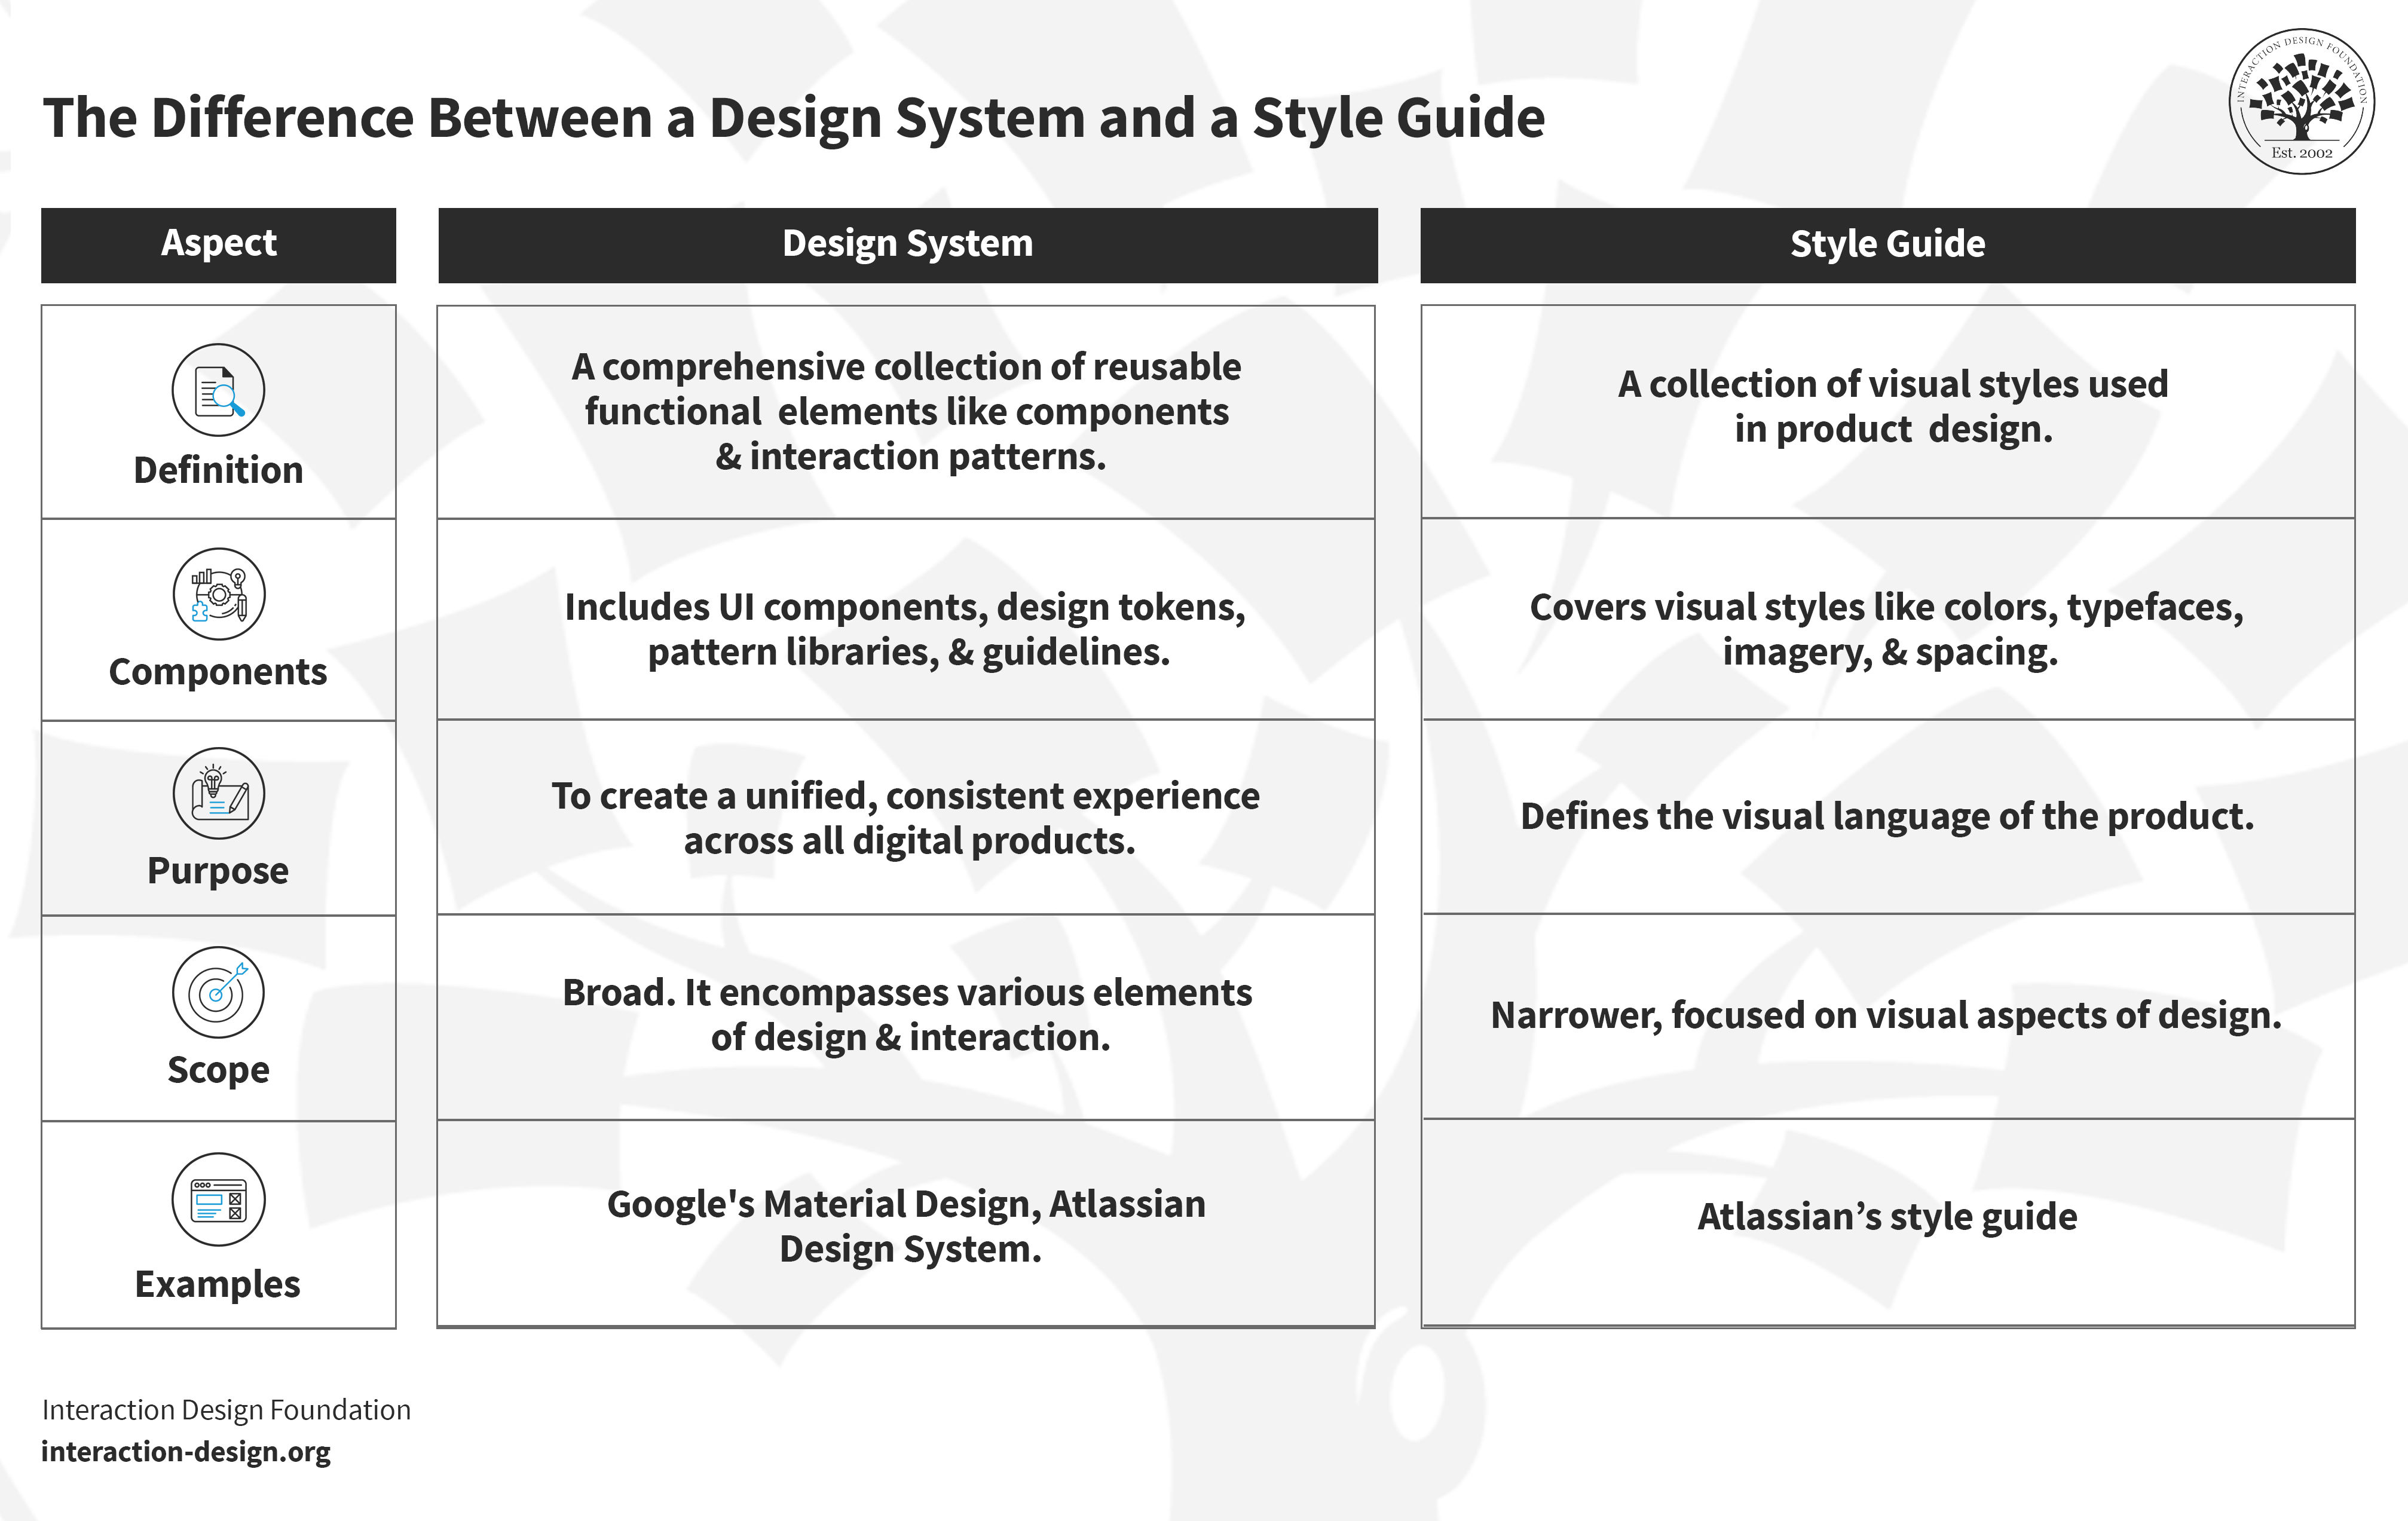 The main differences between a design system and a style guide.